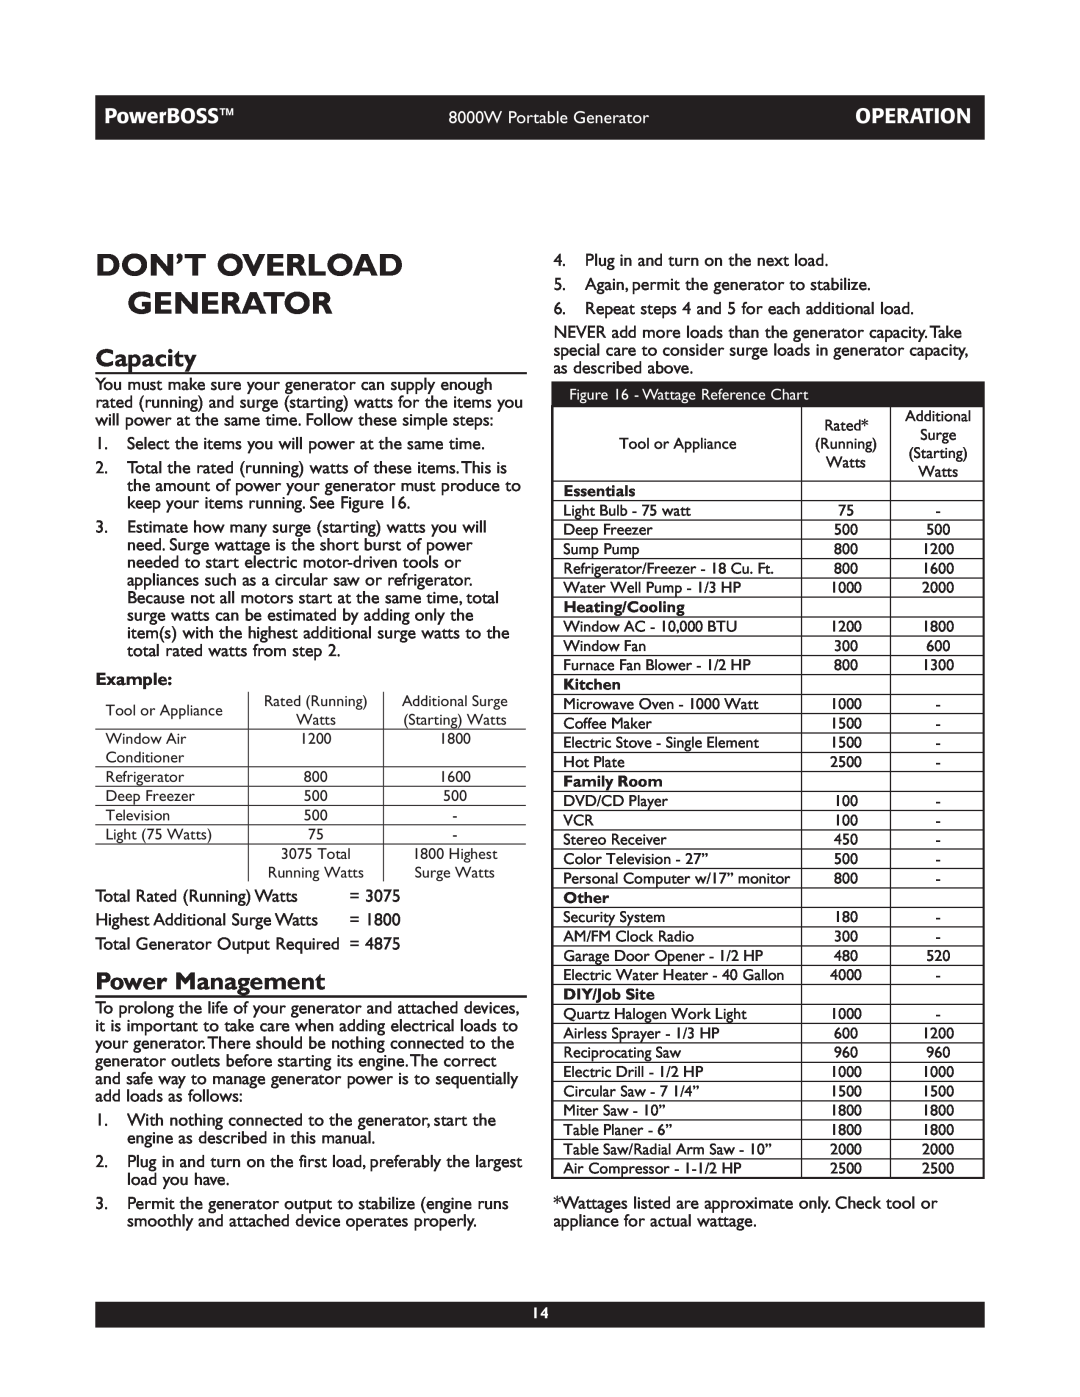 Briggs & Stratton 30228 owner manual Don’T Overload Generator, Capacity, Power Management, PowerBOSS, Operation 